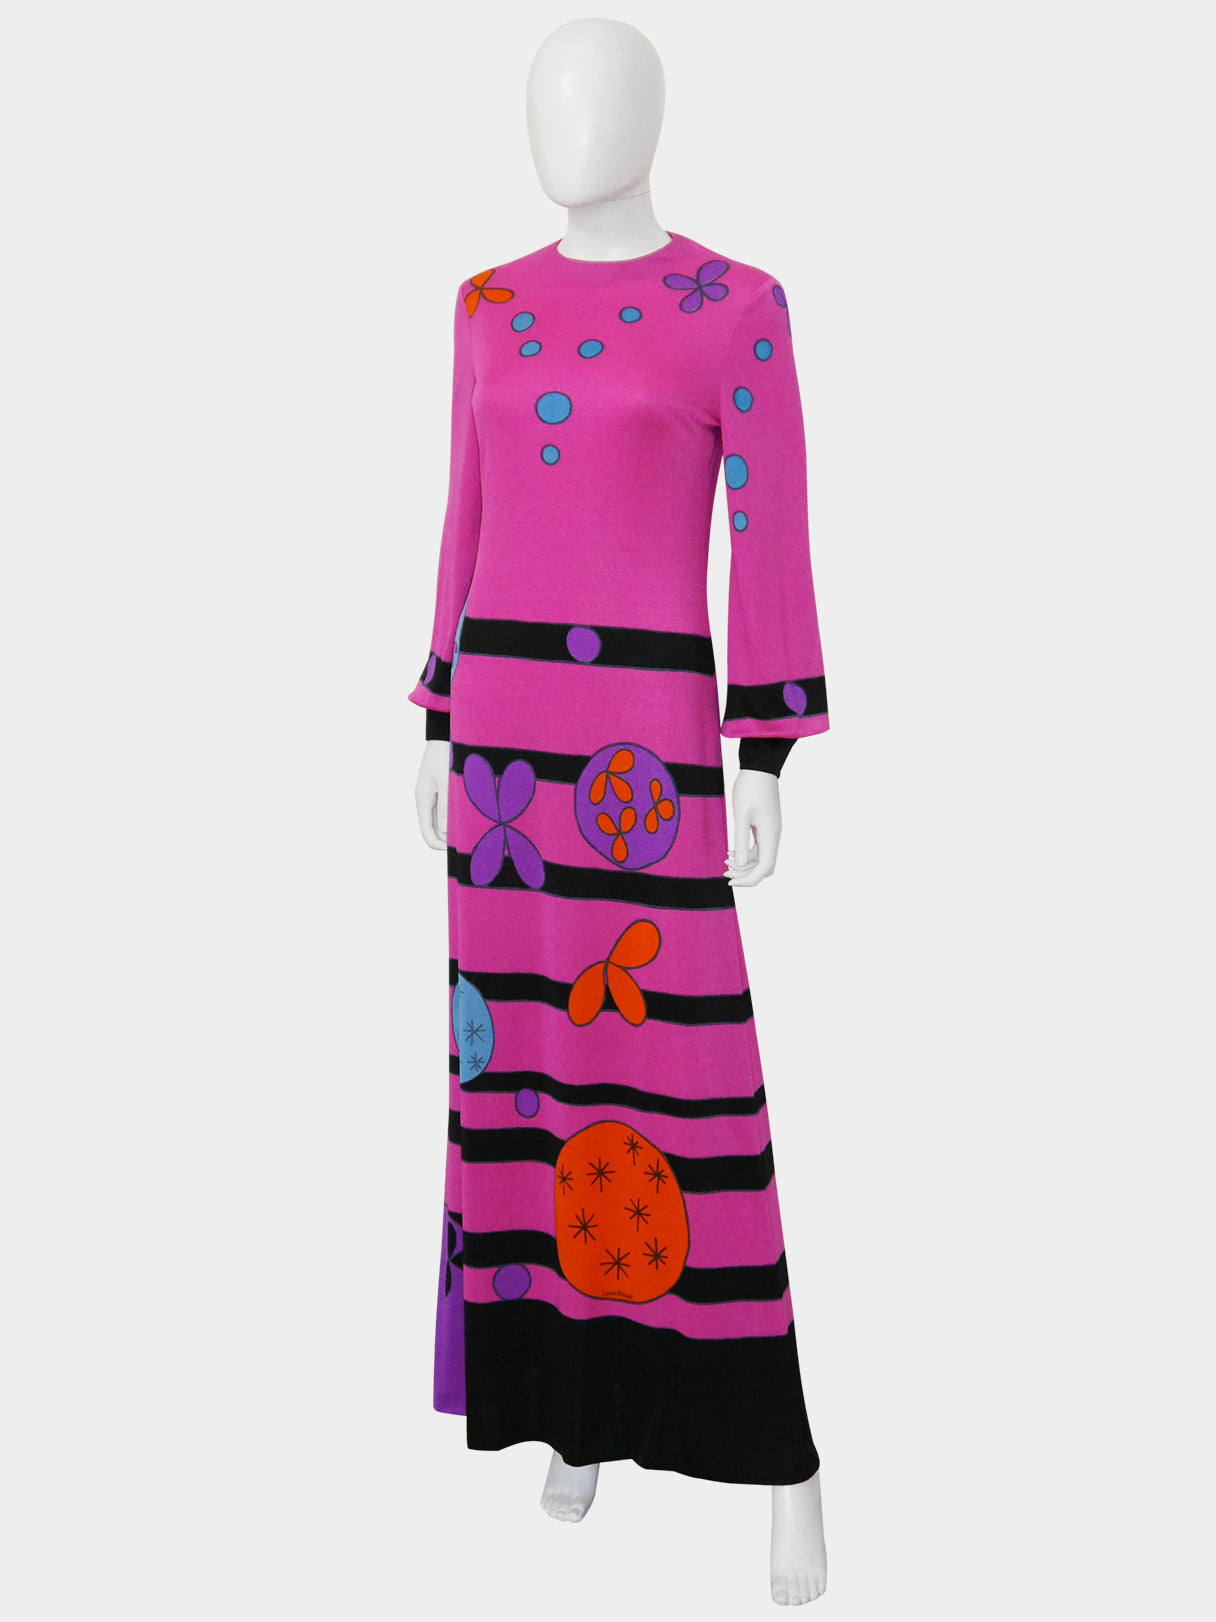 LOUIS FÉRAUD 1960s 1970s Vintage Magenta Pink Psychedelic Print Maxi Evening Dress Size S